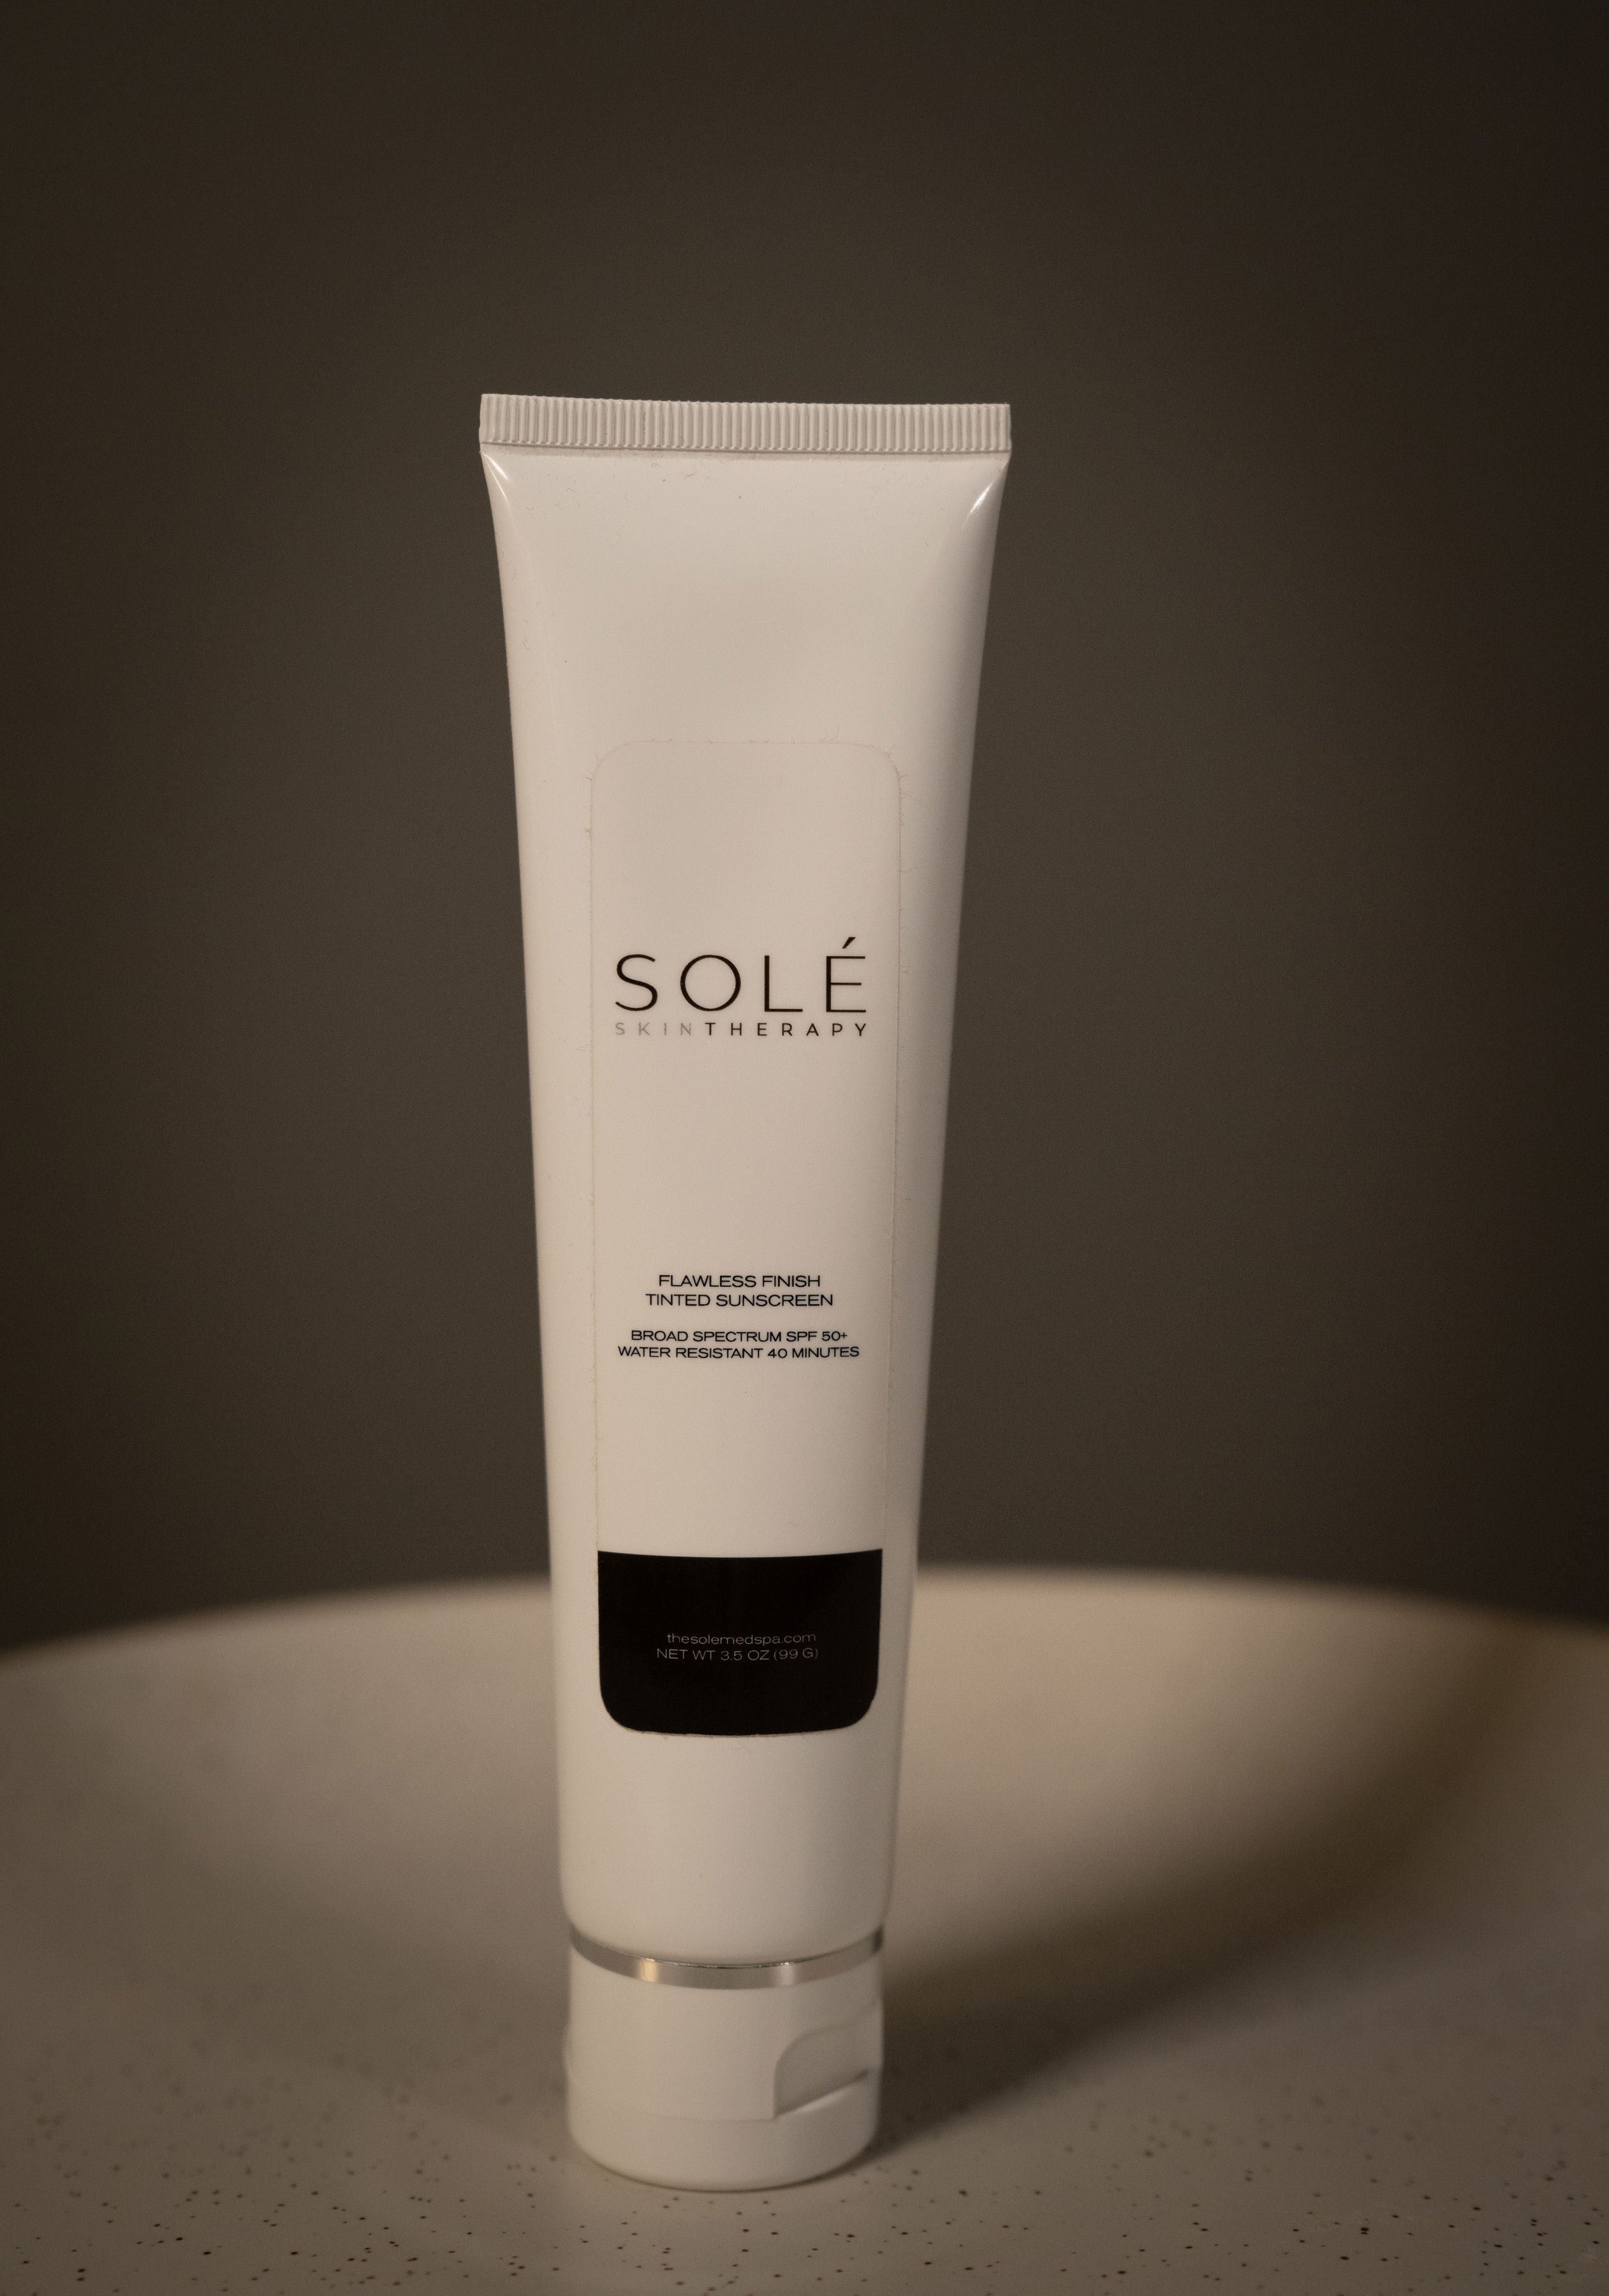 Solé Flawless Finish Tinted Sunscreen